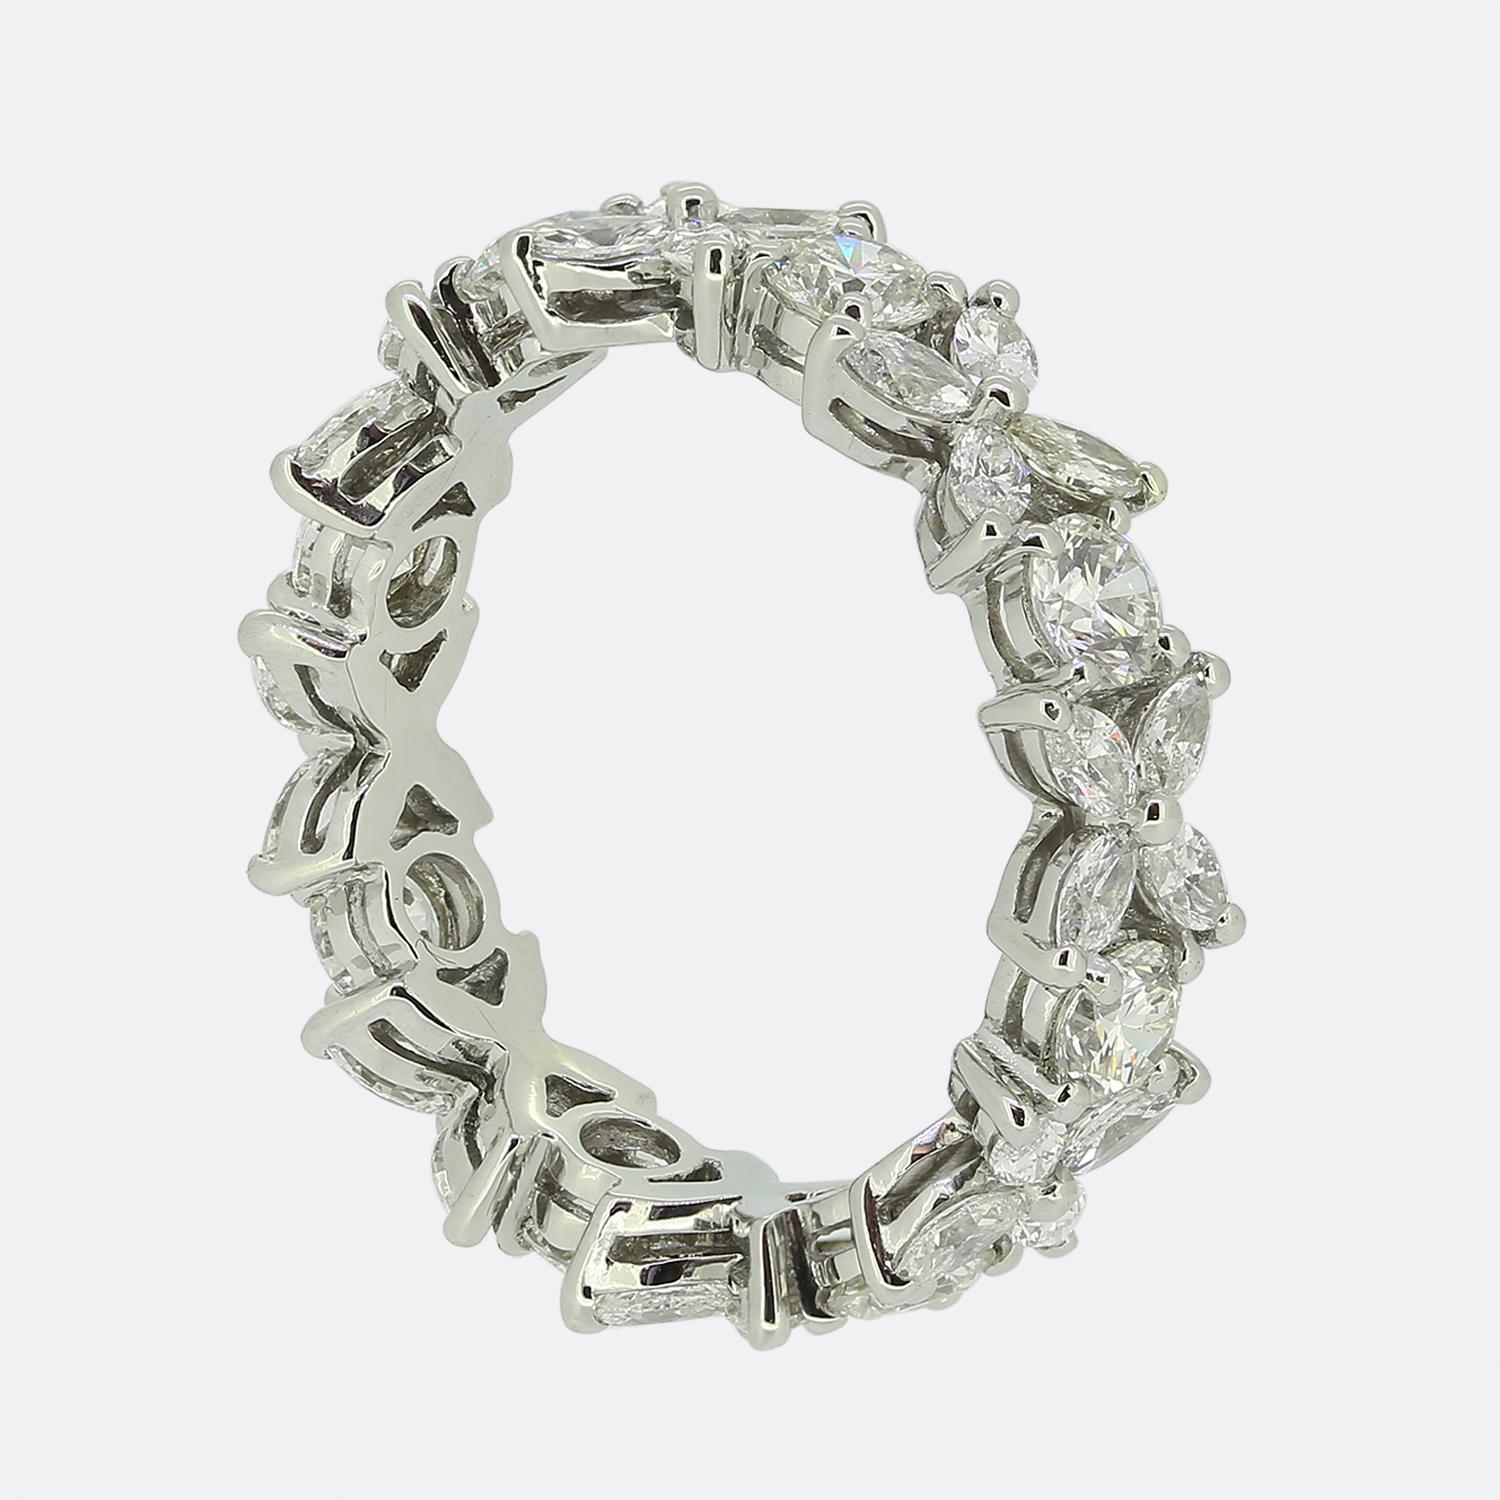 Here we have an outstanding diamond eternity ring from the world renowned jewellery designer, Tiffany & Co. This piece has been crafted from platinum and showcases an alternating sequence of Tiffany's iconic Victoria design consisting of four